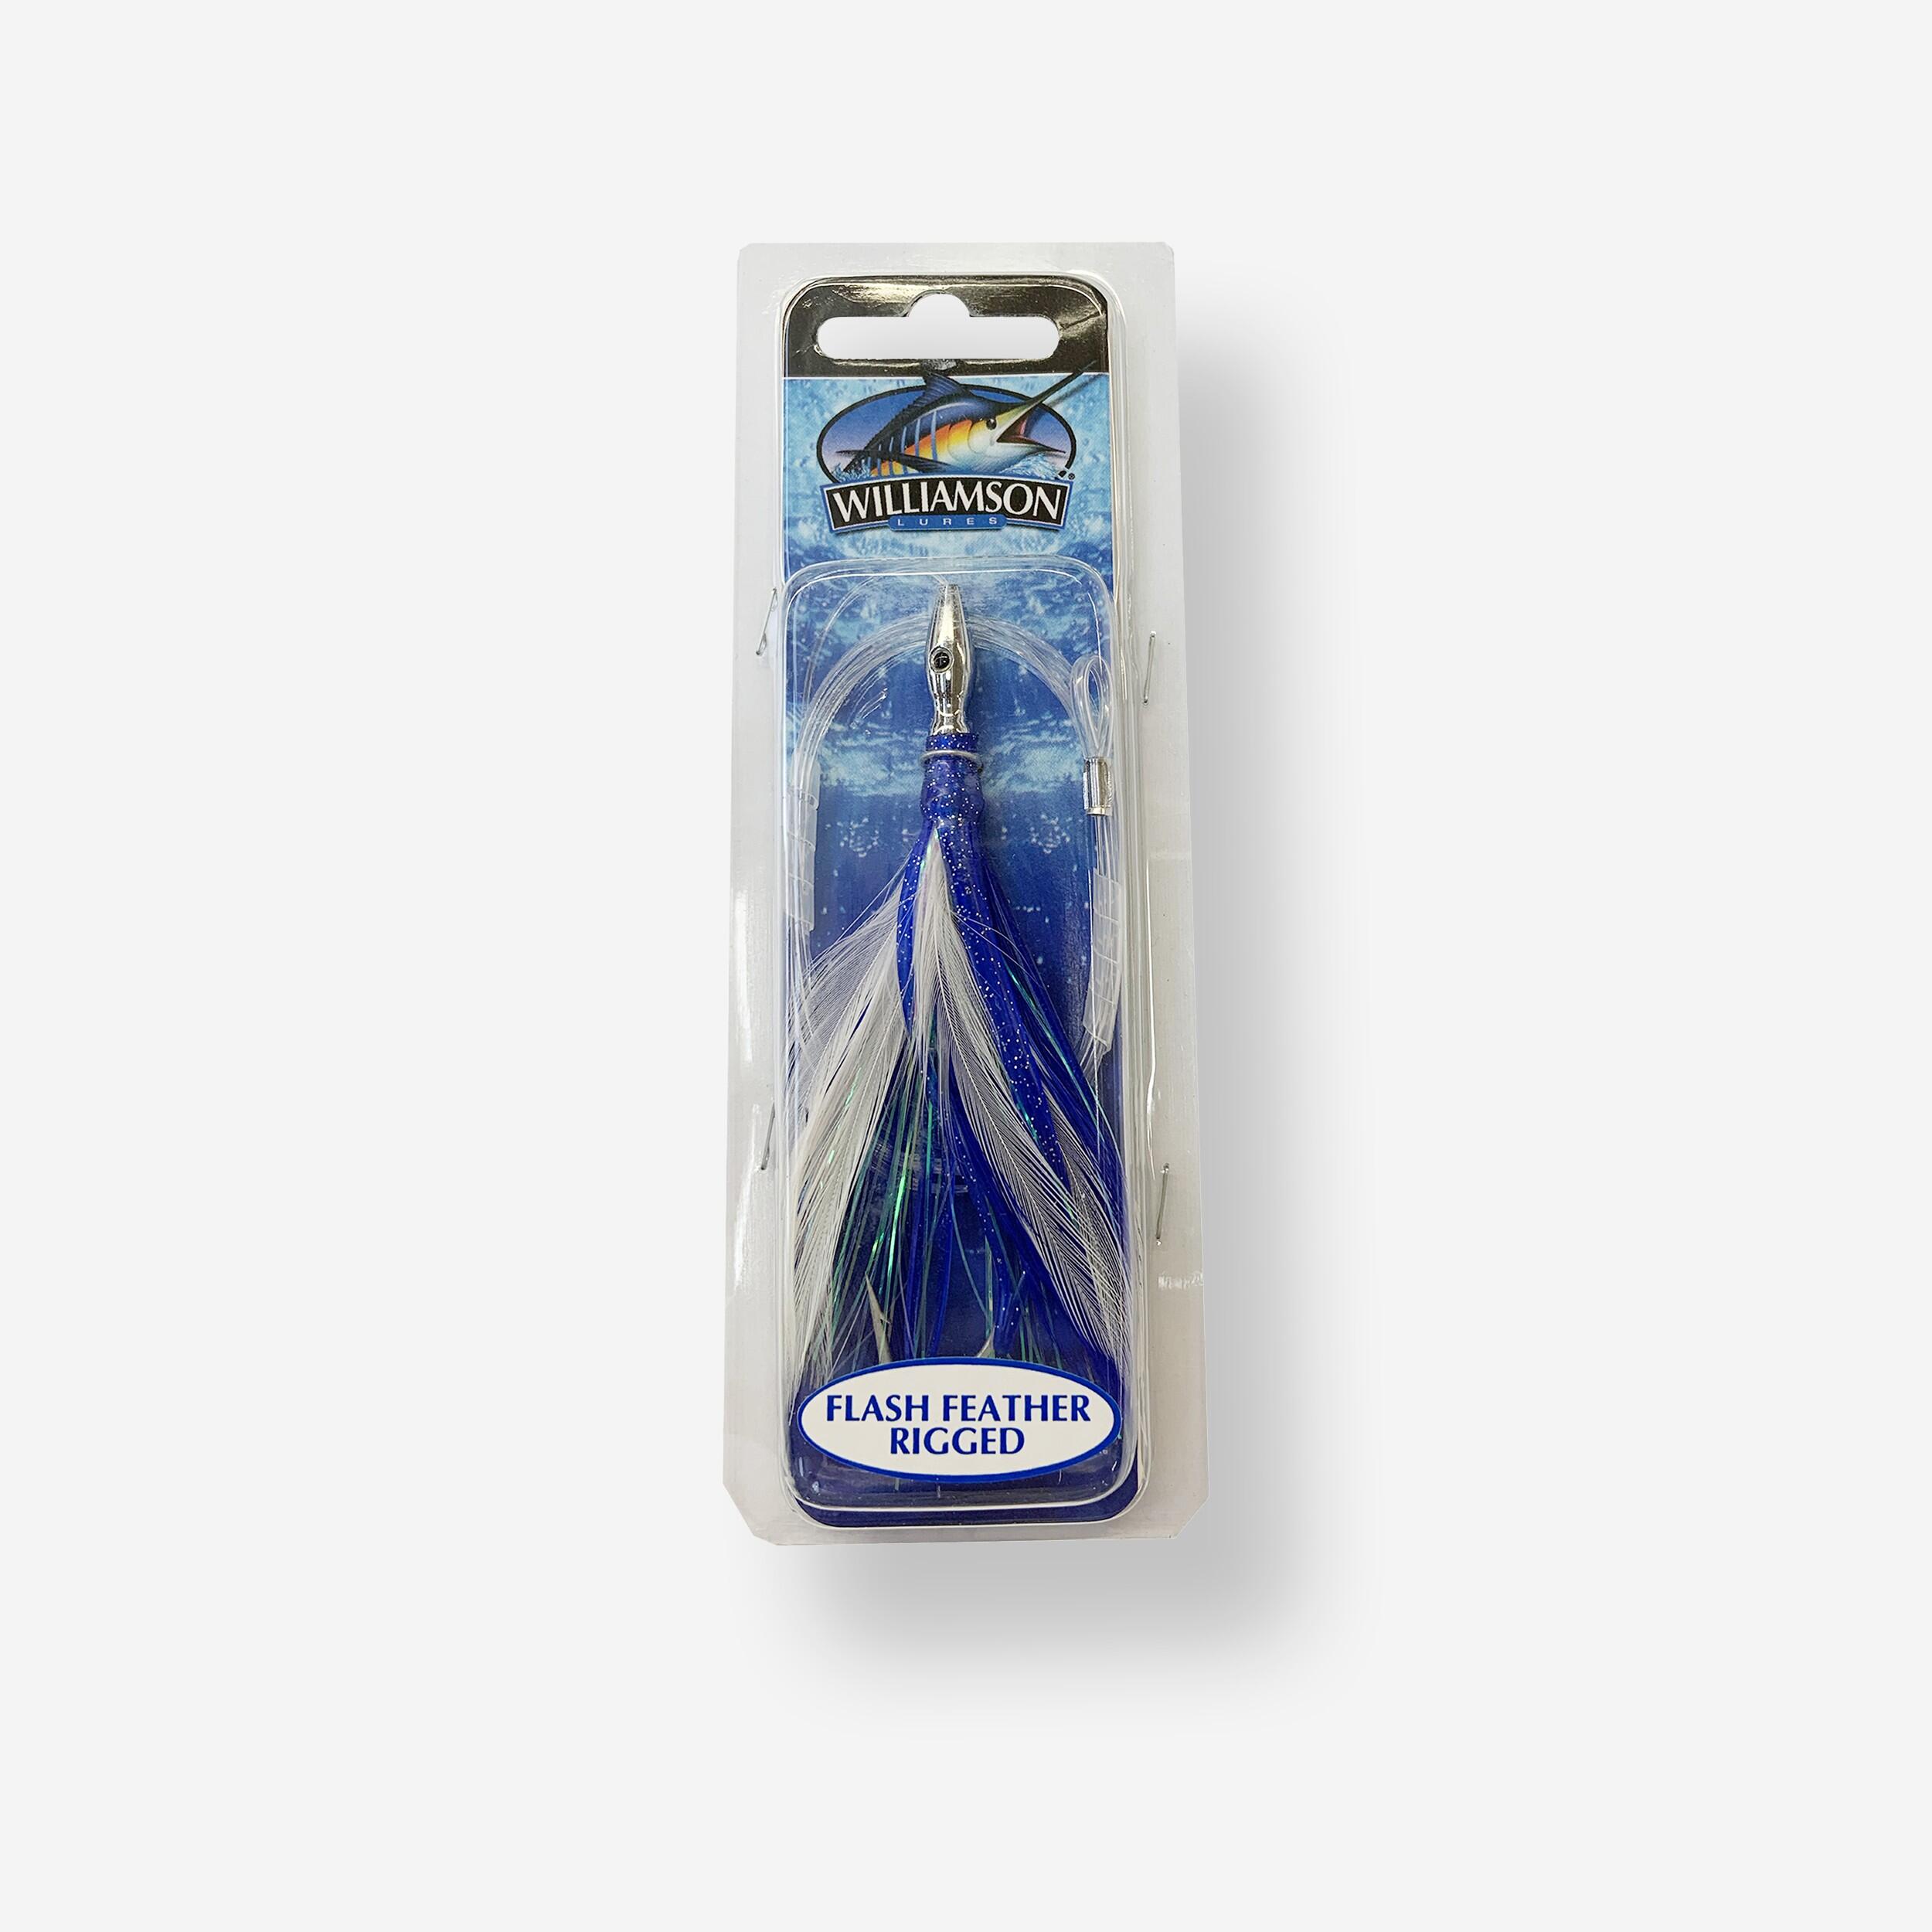 WILLIAMSON Rigged Flash Feather blue 04 trolling lure